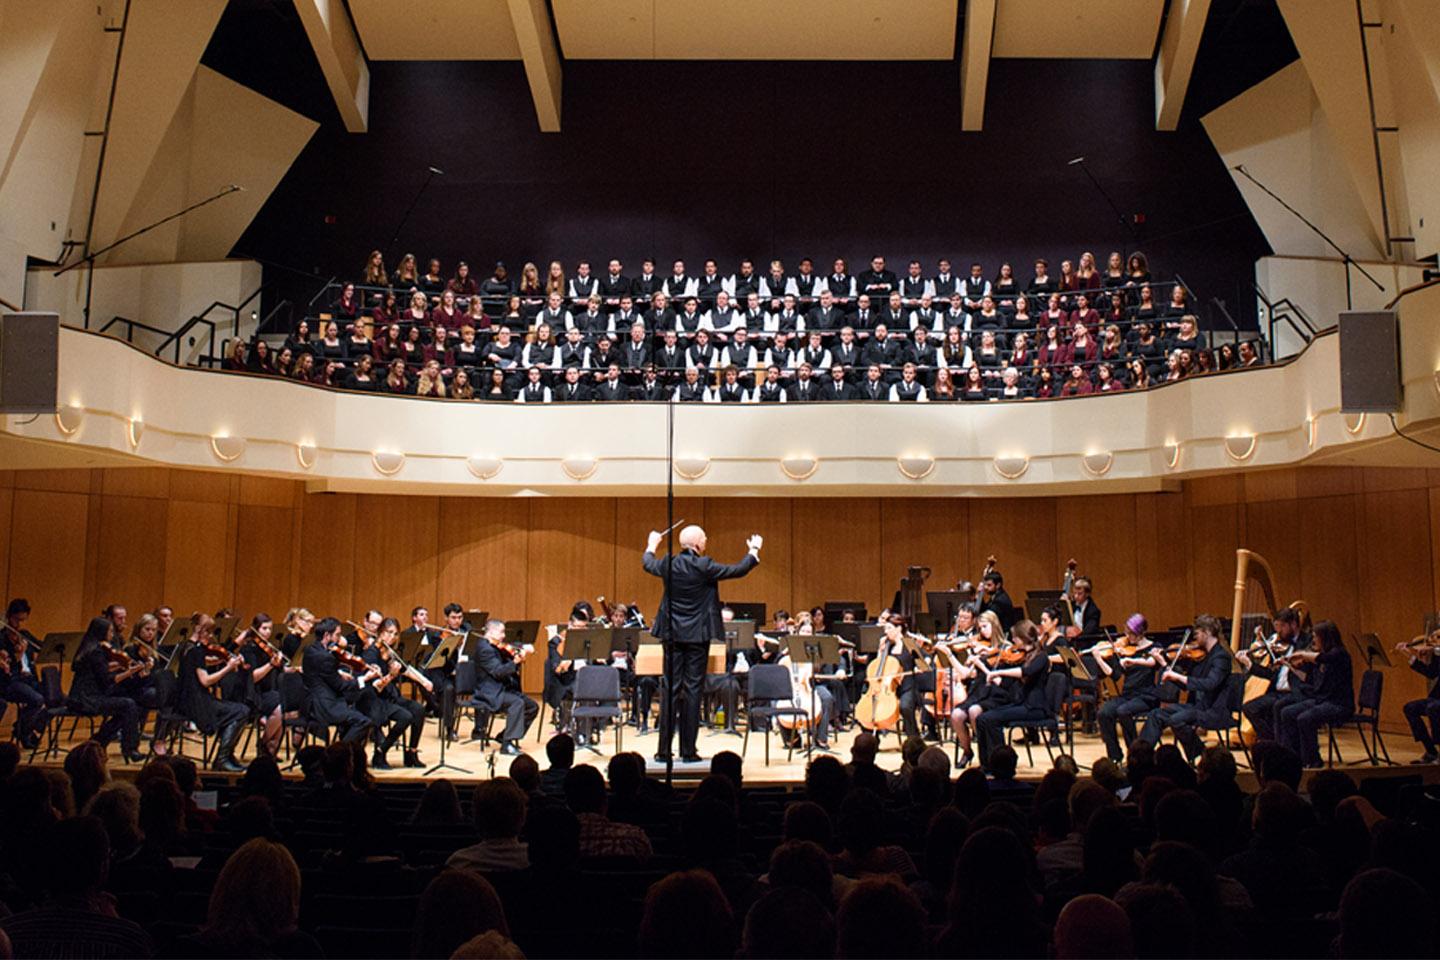 Full symphony orchestra and choir performing in the King Center Concert Hall